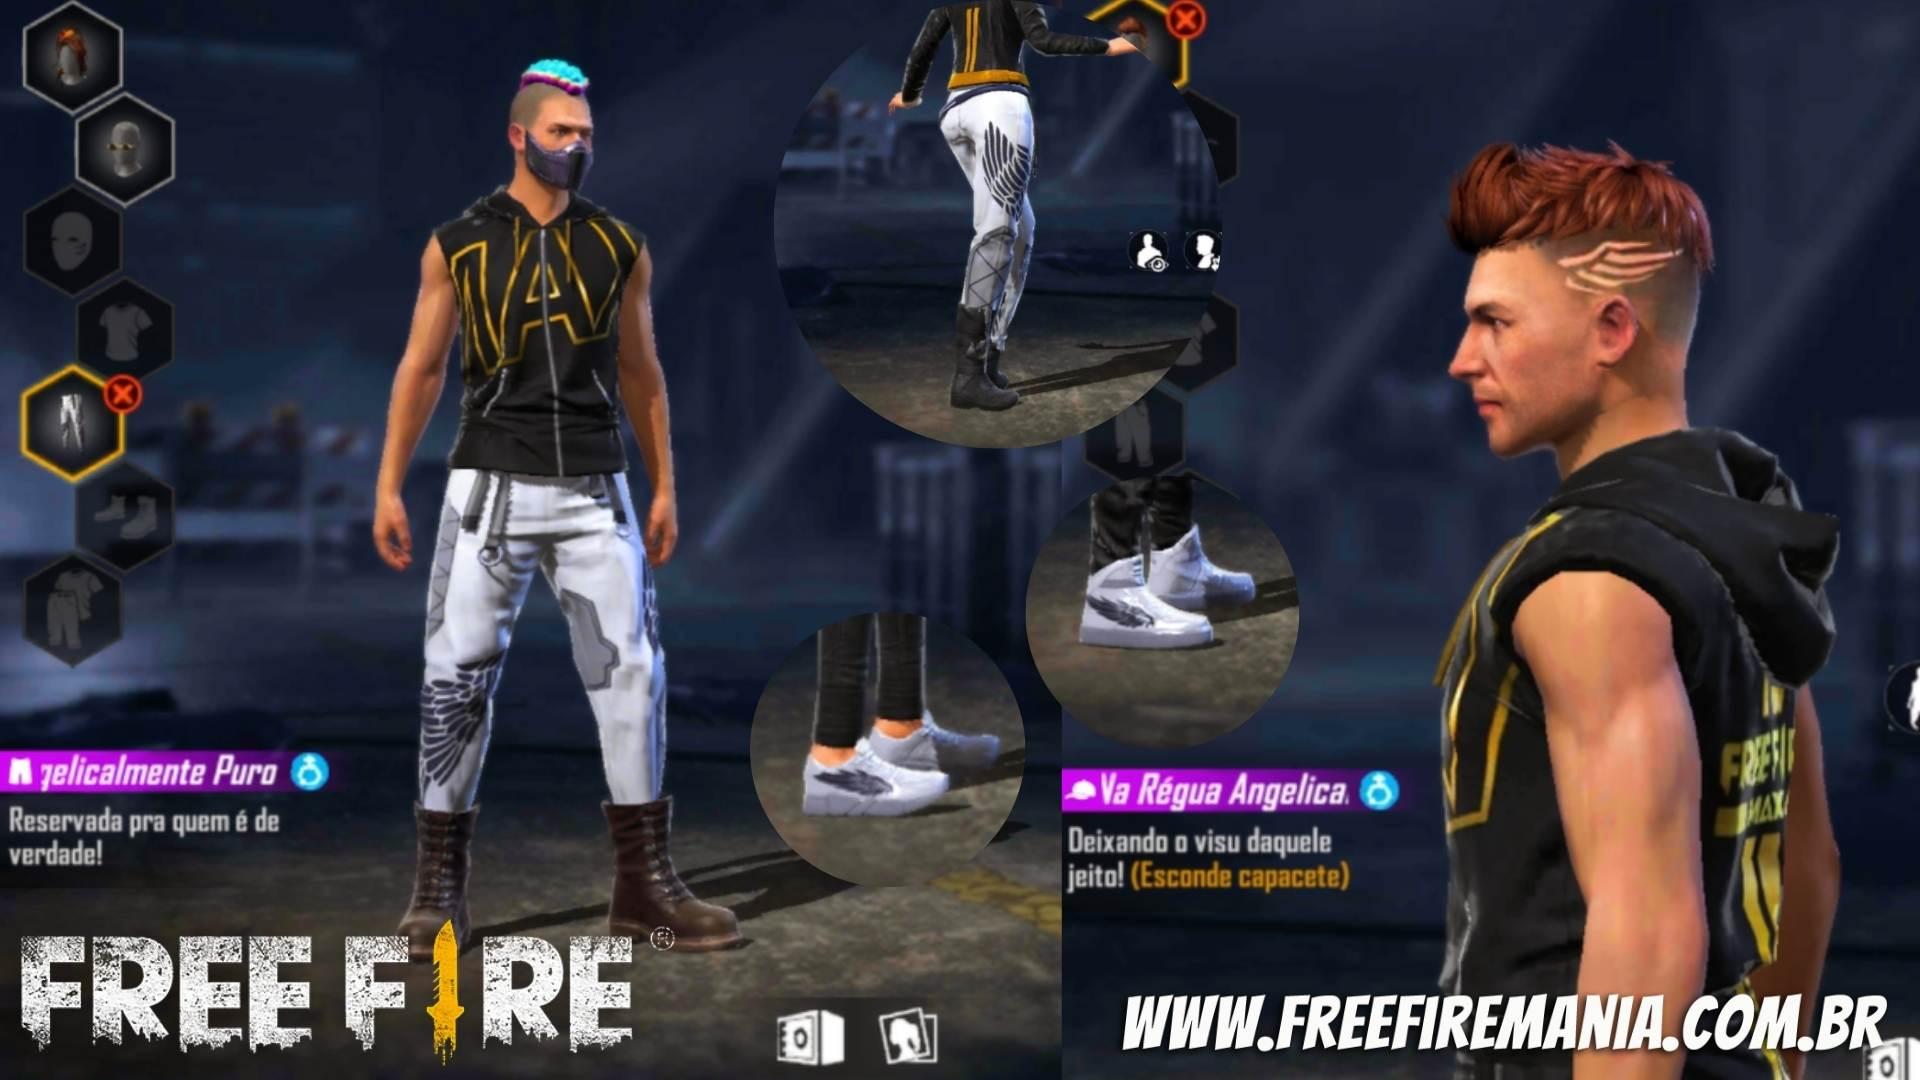 White Angelic Pants at Free Fire: check out the full collection